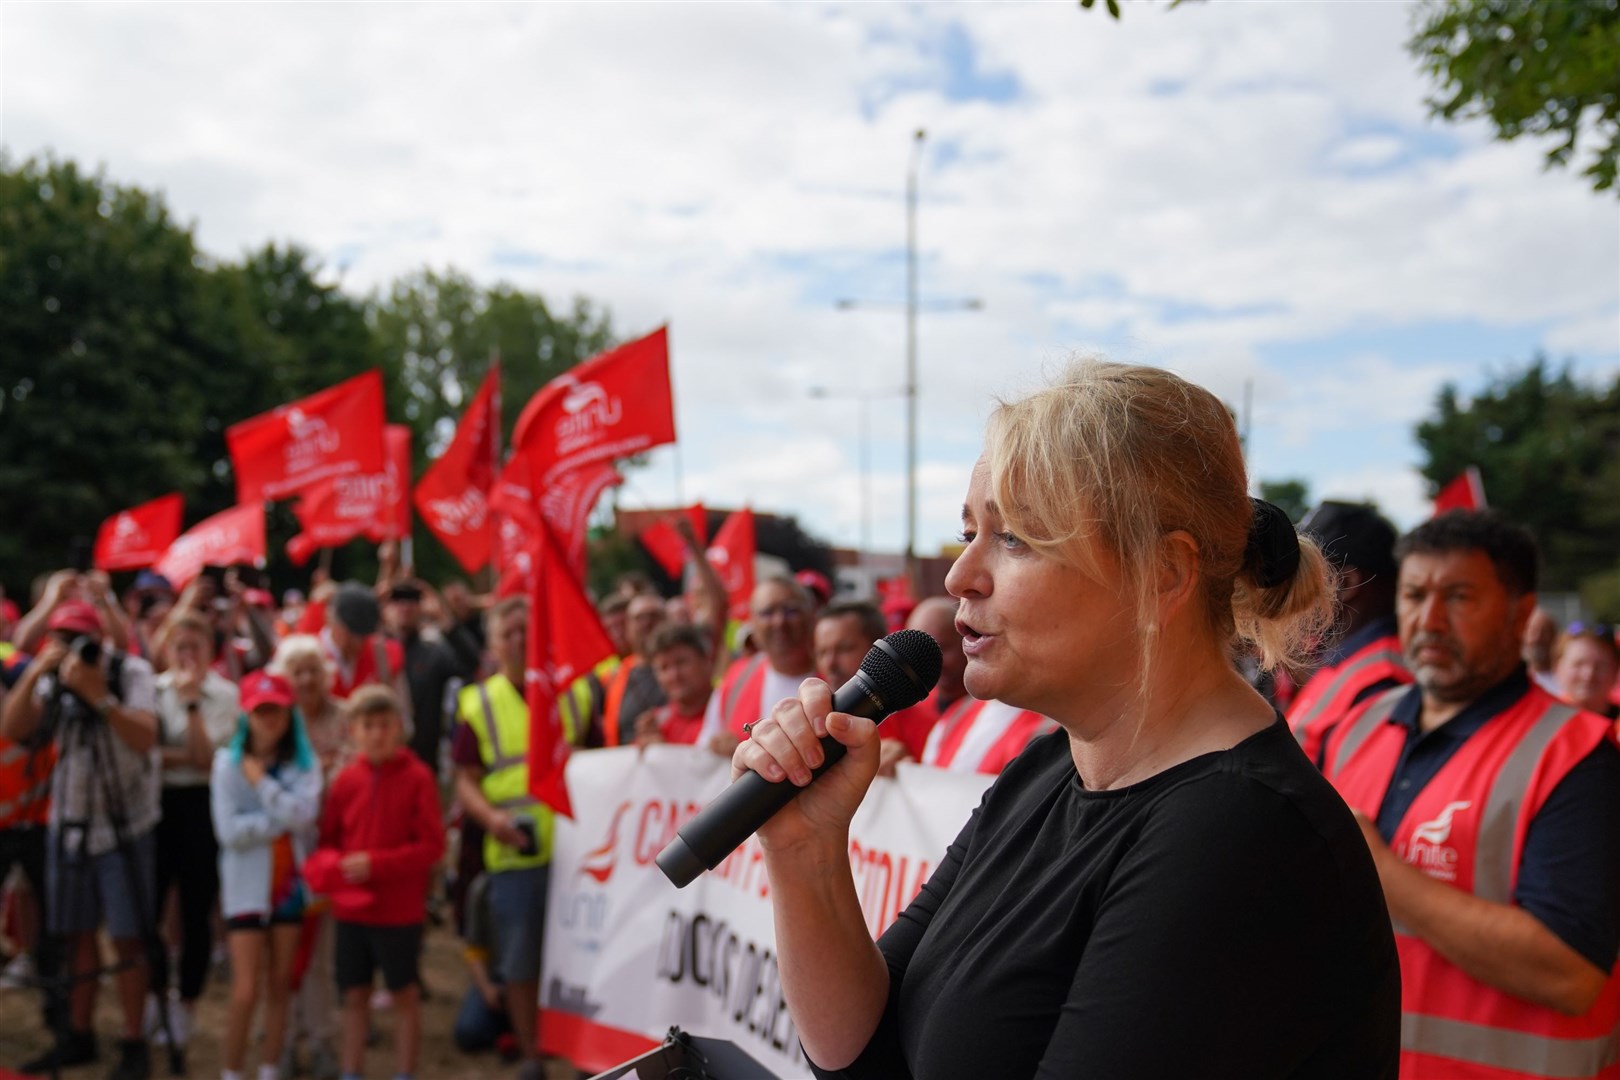 Unite’s general secretary Sharon Graham warned that industrial action would be escalated if their request for a 10% increase in wages was not met (Joe Giddens/ PA)